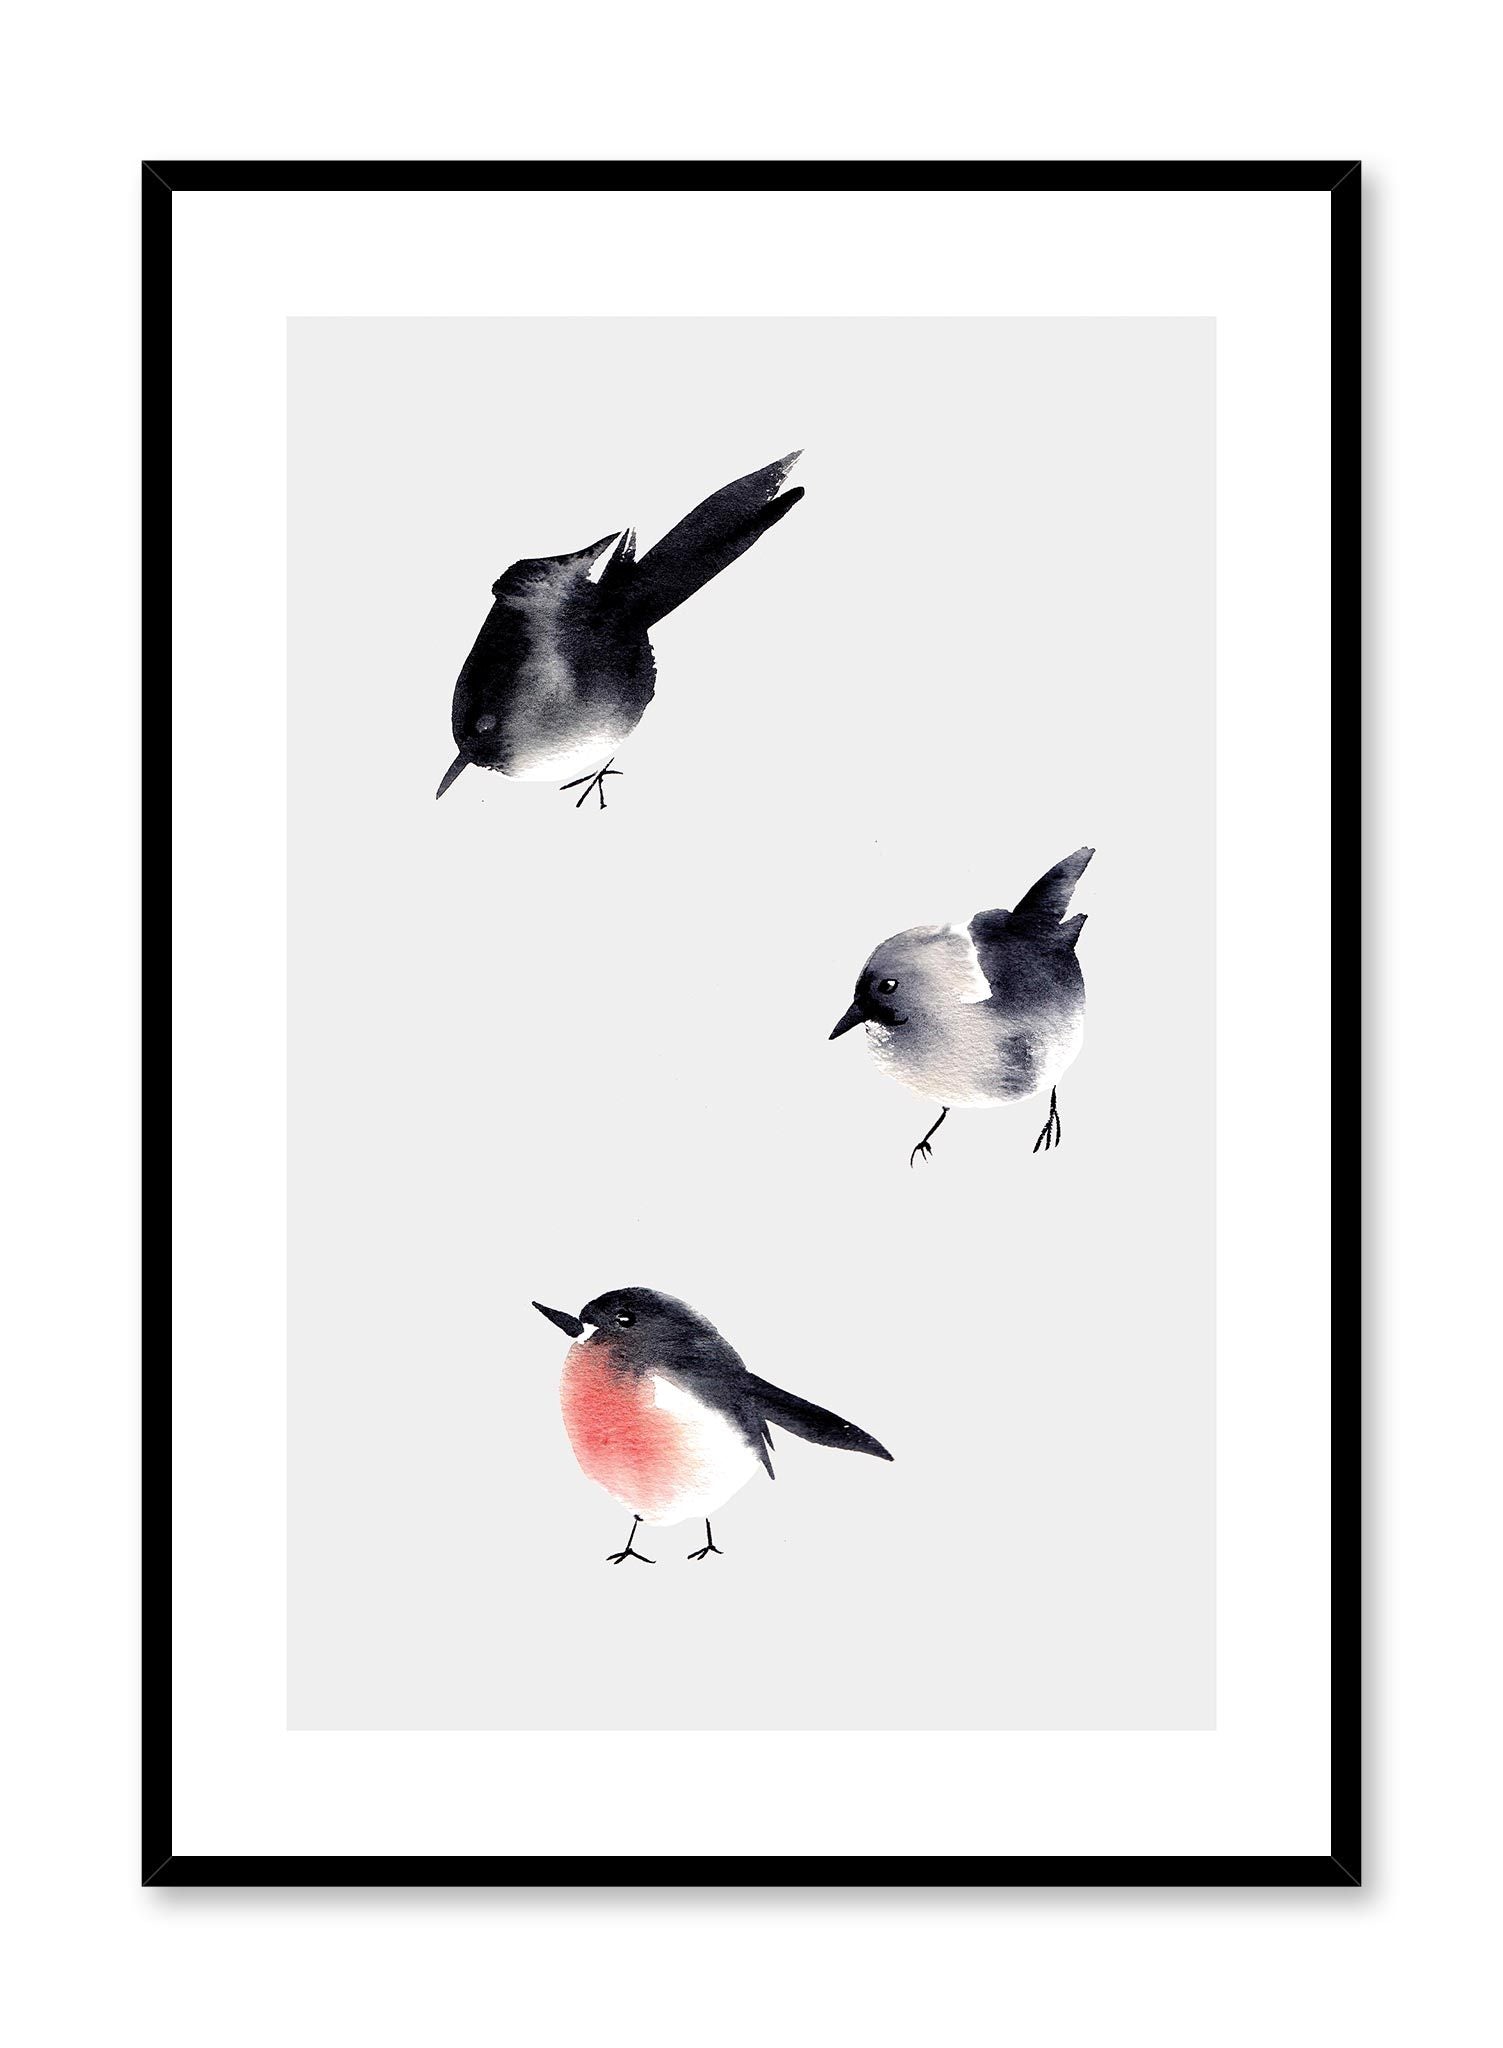 Birdies is a minimalist illustration by Opposite Wall of three small birds in different poses.